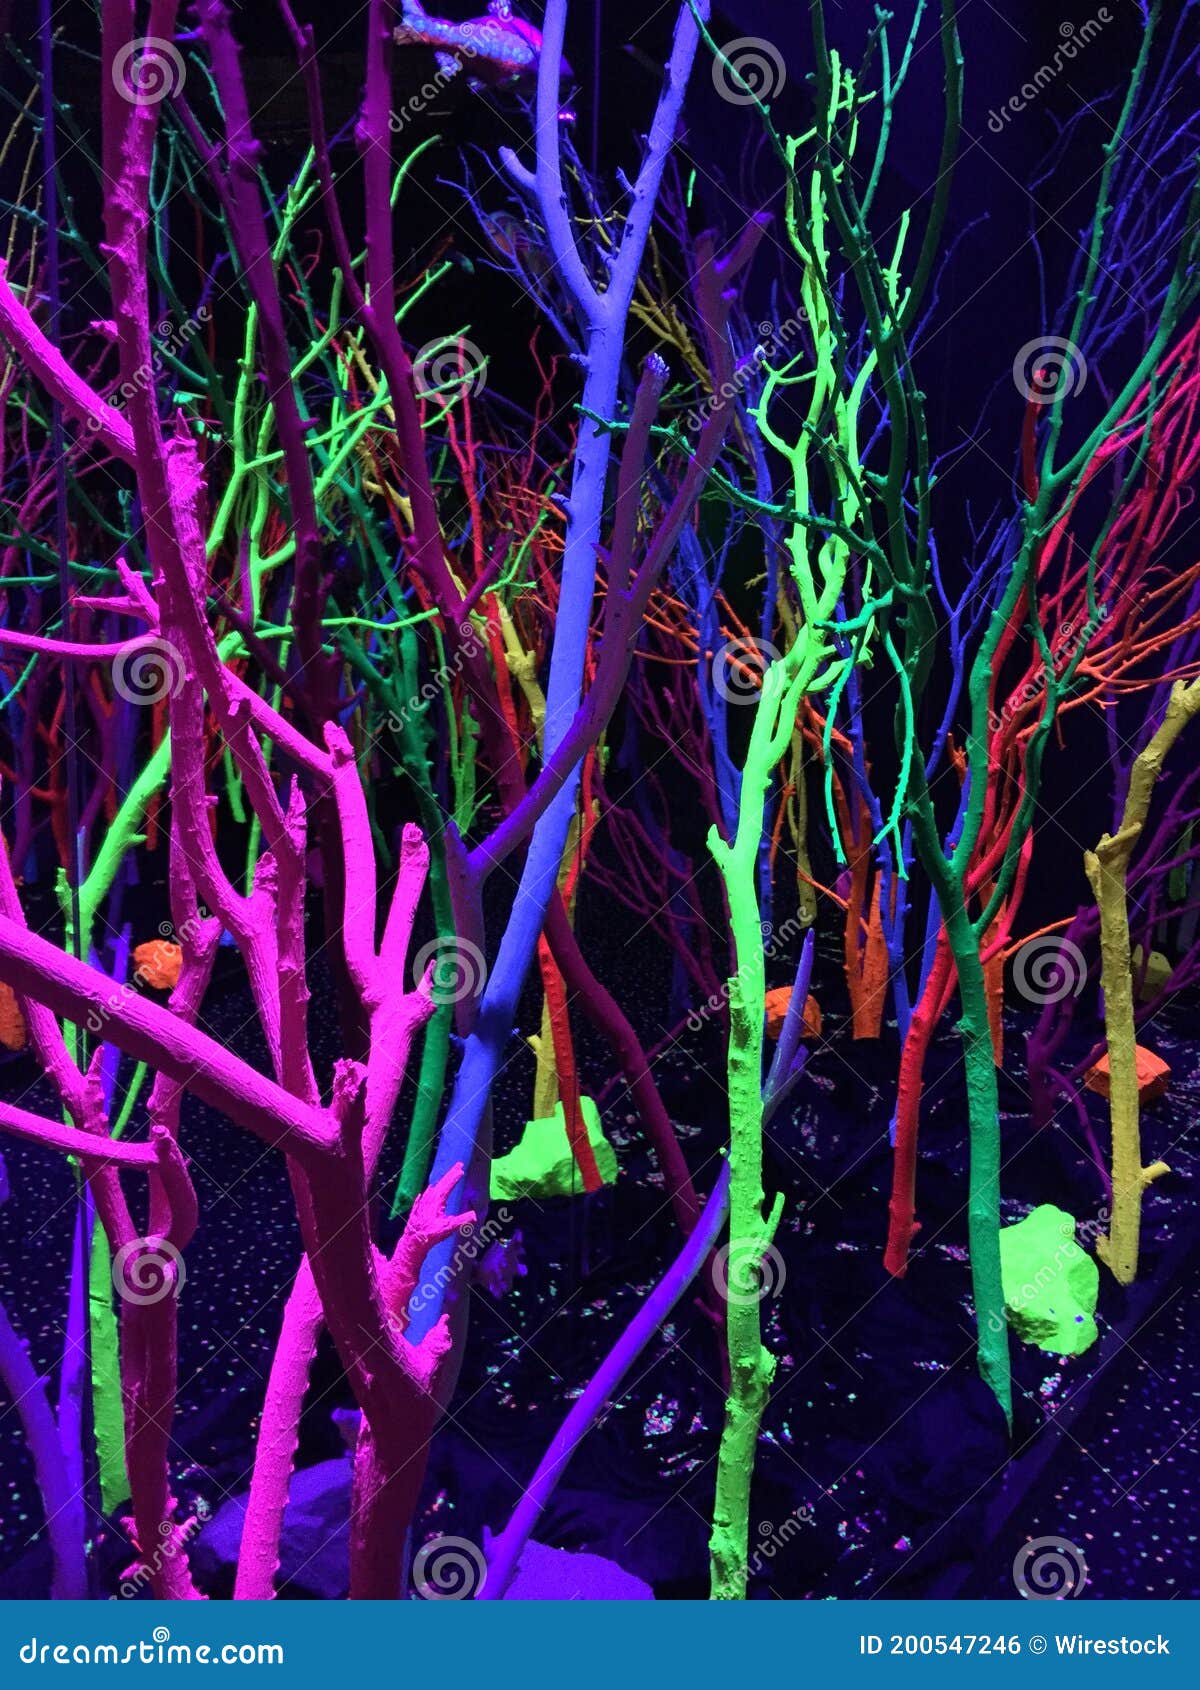 Closeup of Neon Decorations on the Trees, Immersive Art Stock Photo - Image  of wallpaper, decorations: 200547246